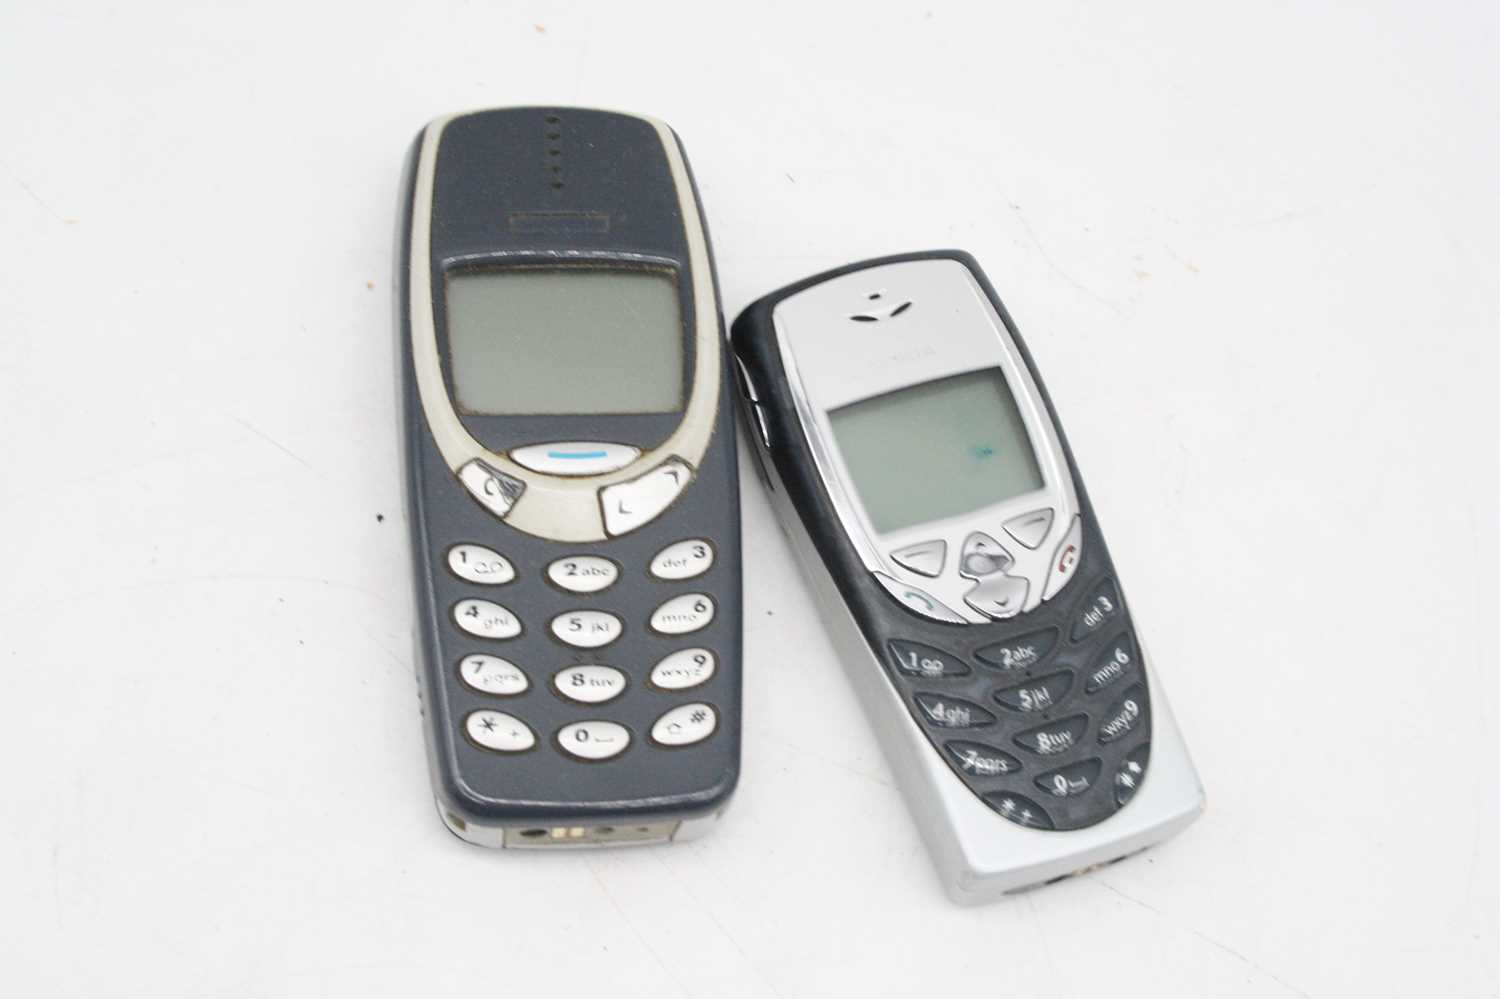 A collection of vintage Nokia mobile phones, together with an IMC Mammoet model jacking system - Image 2 of 4